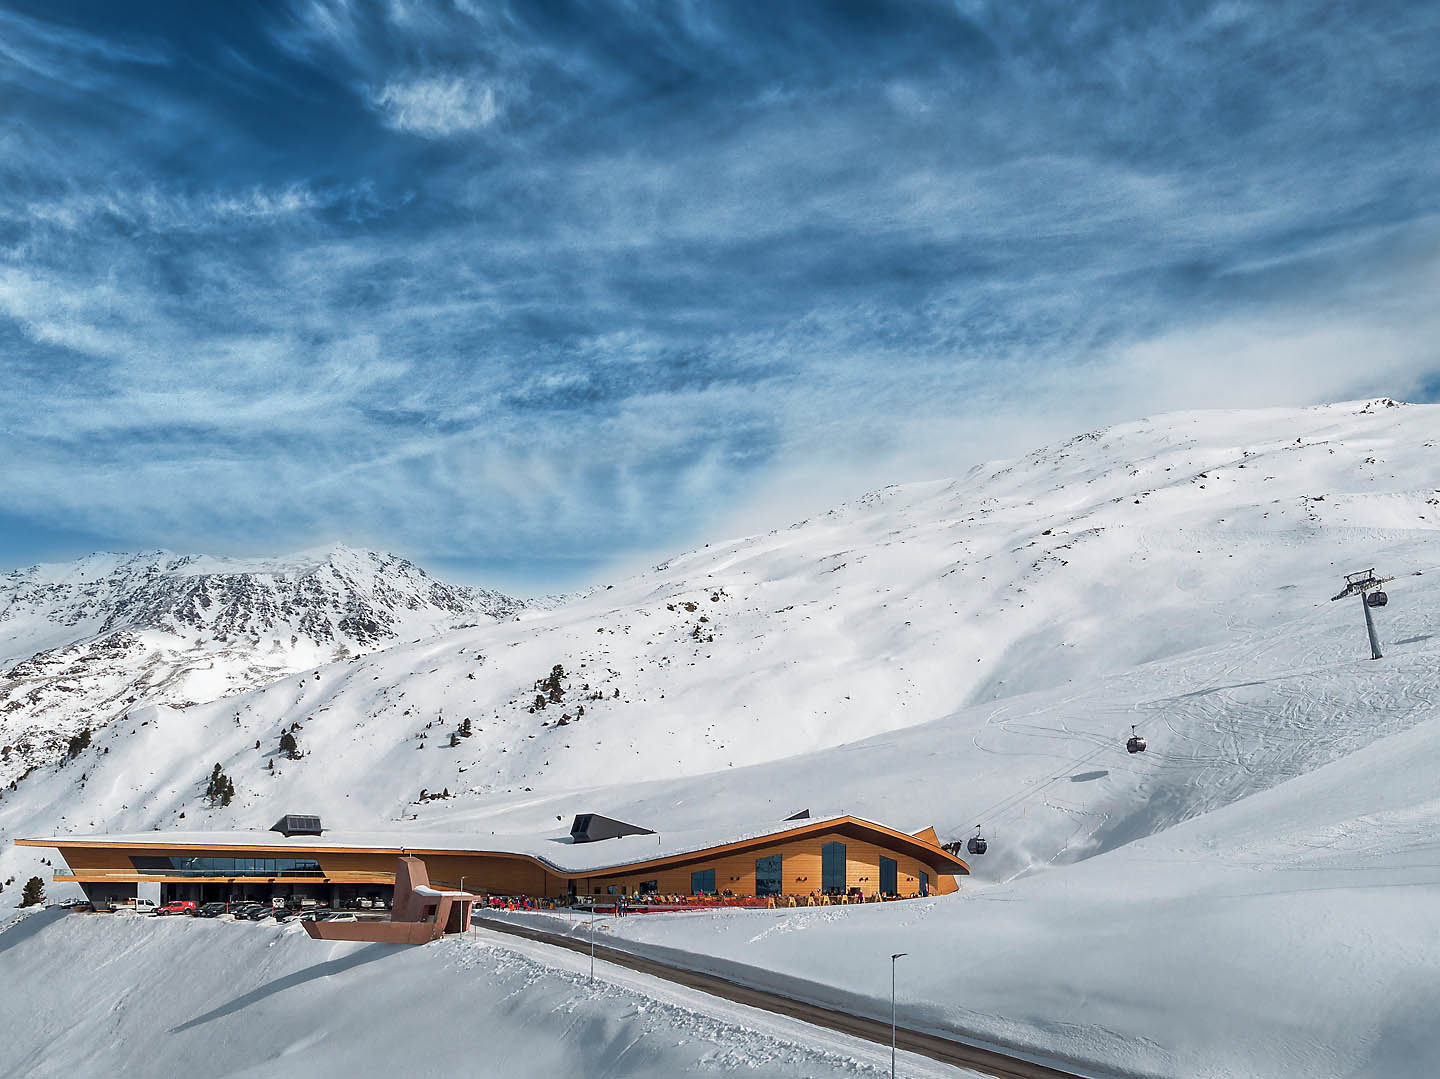 Building surrounded by snowy mountain